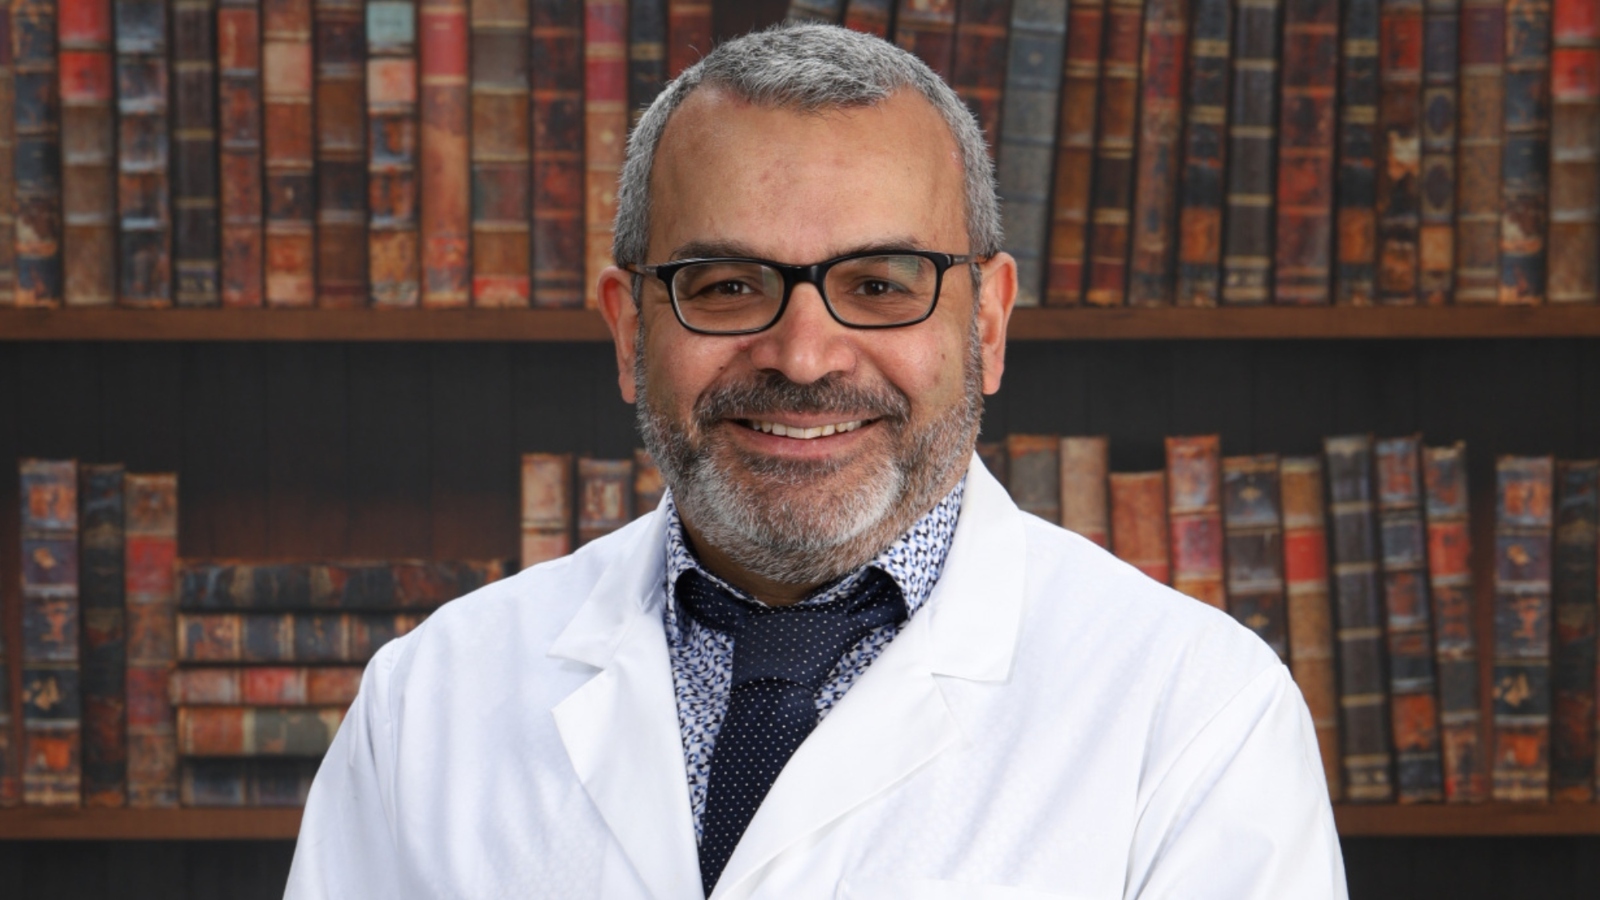 Sherif Mahmoud led new research showing that different methods of giving patients the same drug to prevent severe complications after a type of stroke lead to different outcomes, suggesting a need to standardize the treatment. (Photo: Supplied)